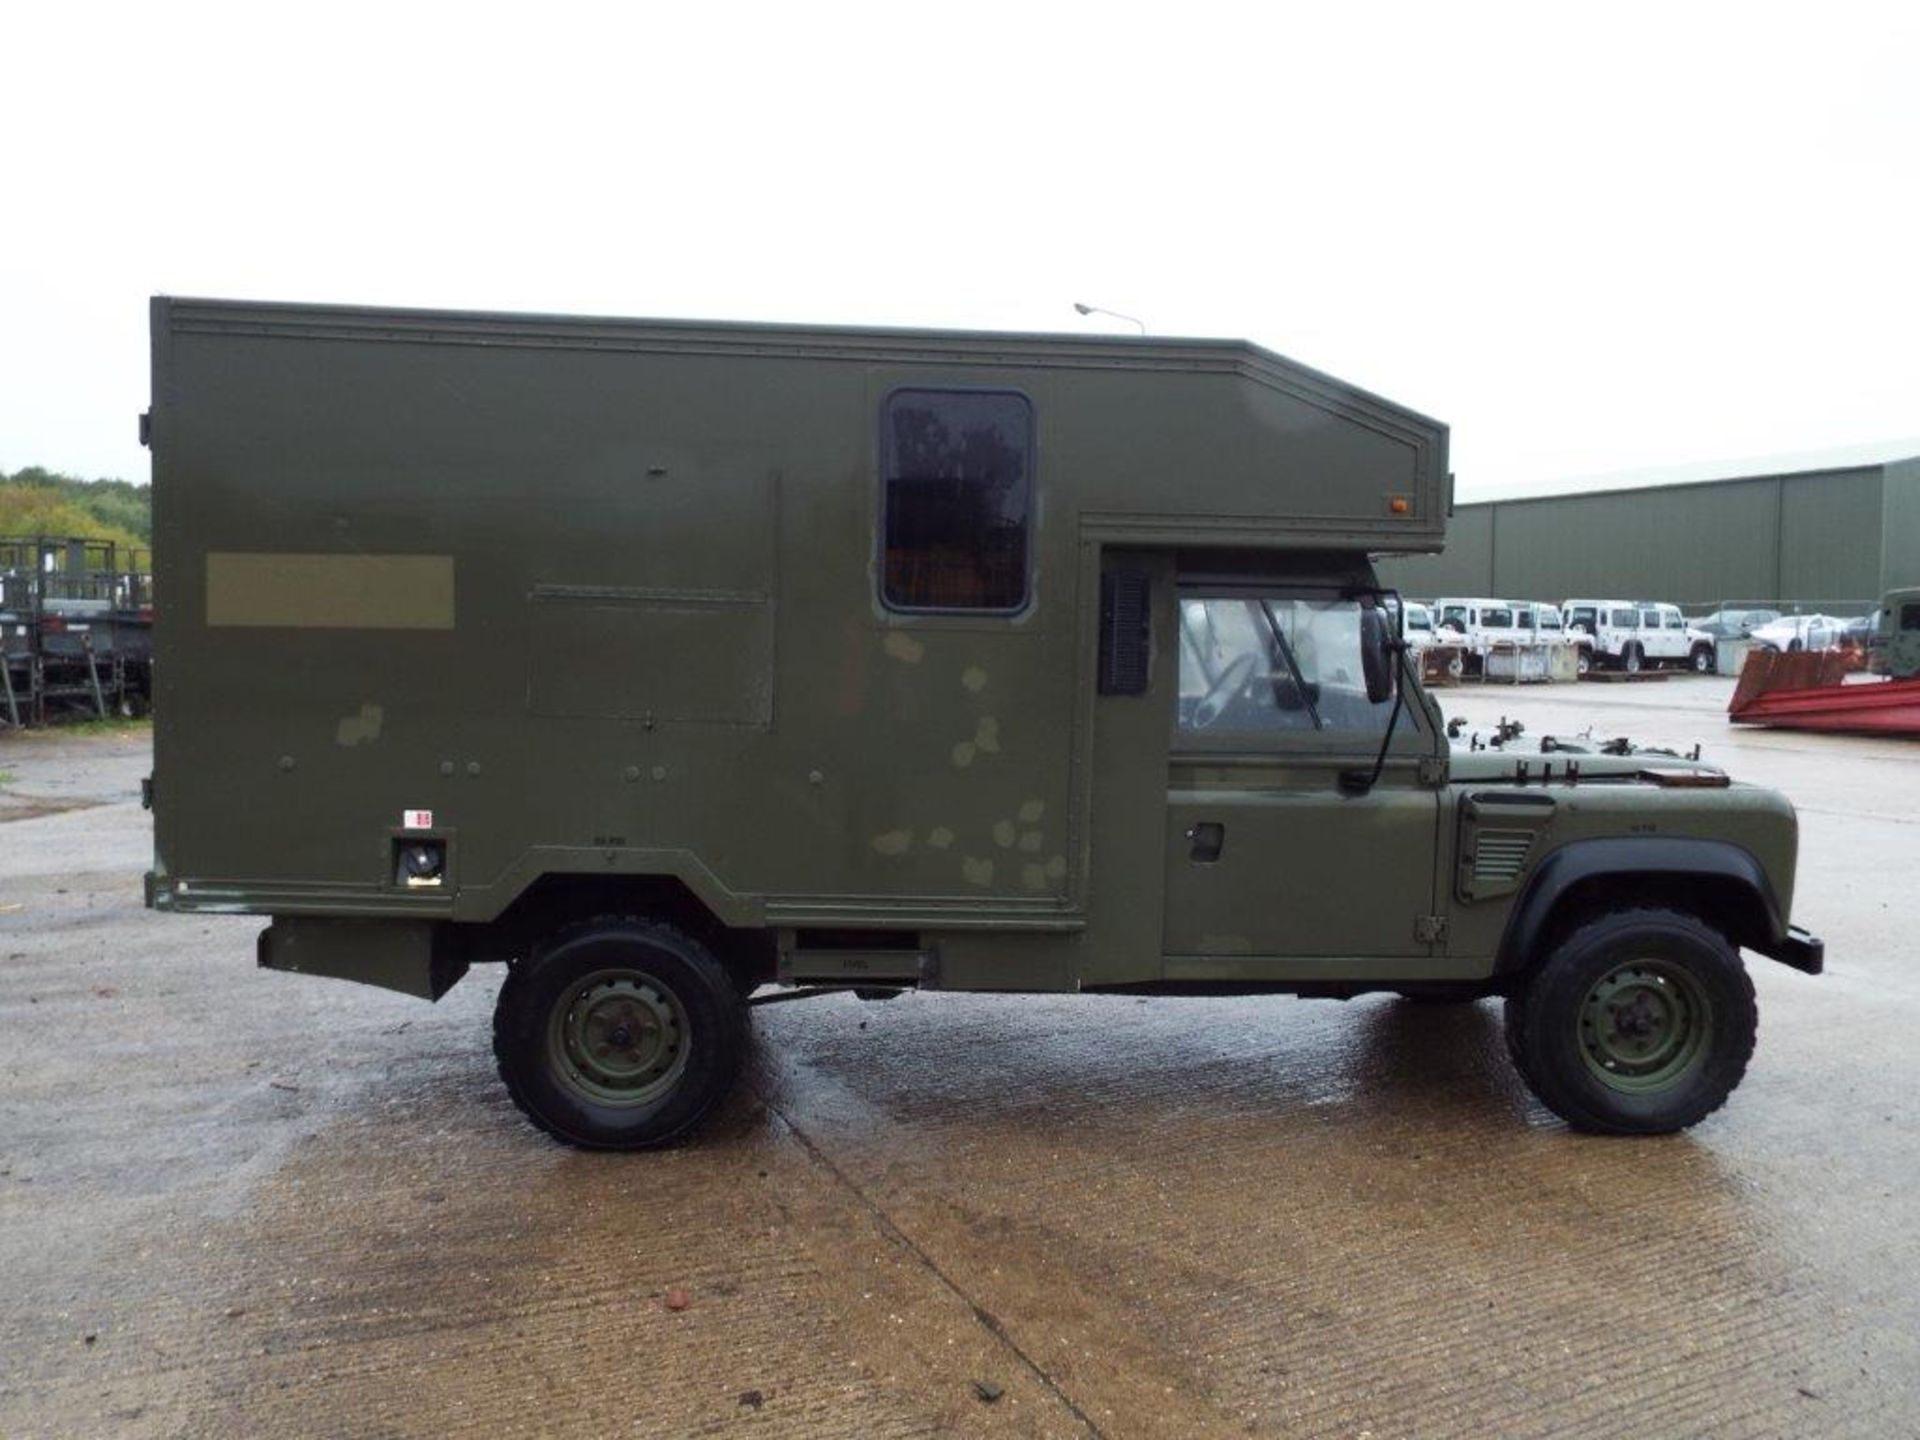 Military Specification LHD Land Rover Wolf 130 Ambulance - Image 8 of 23